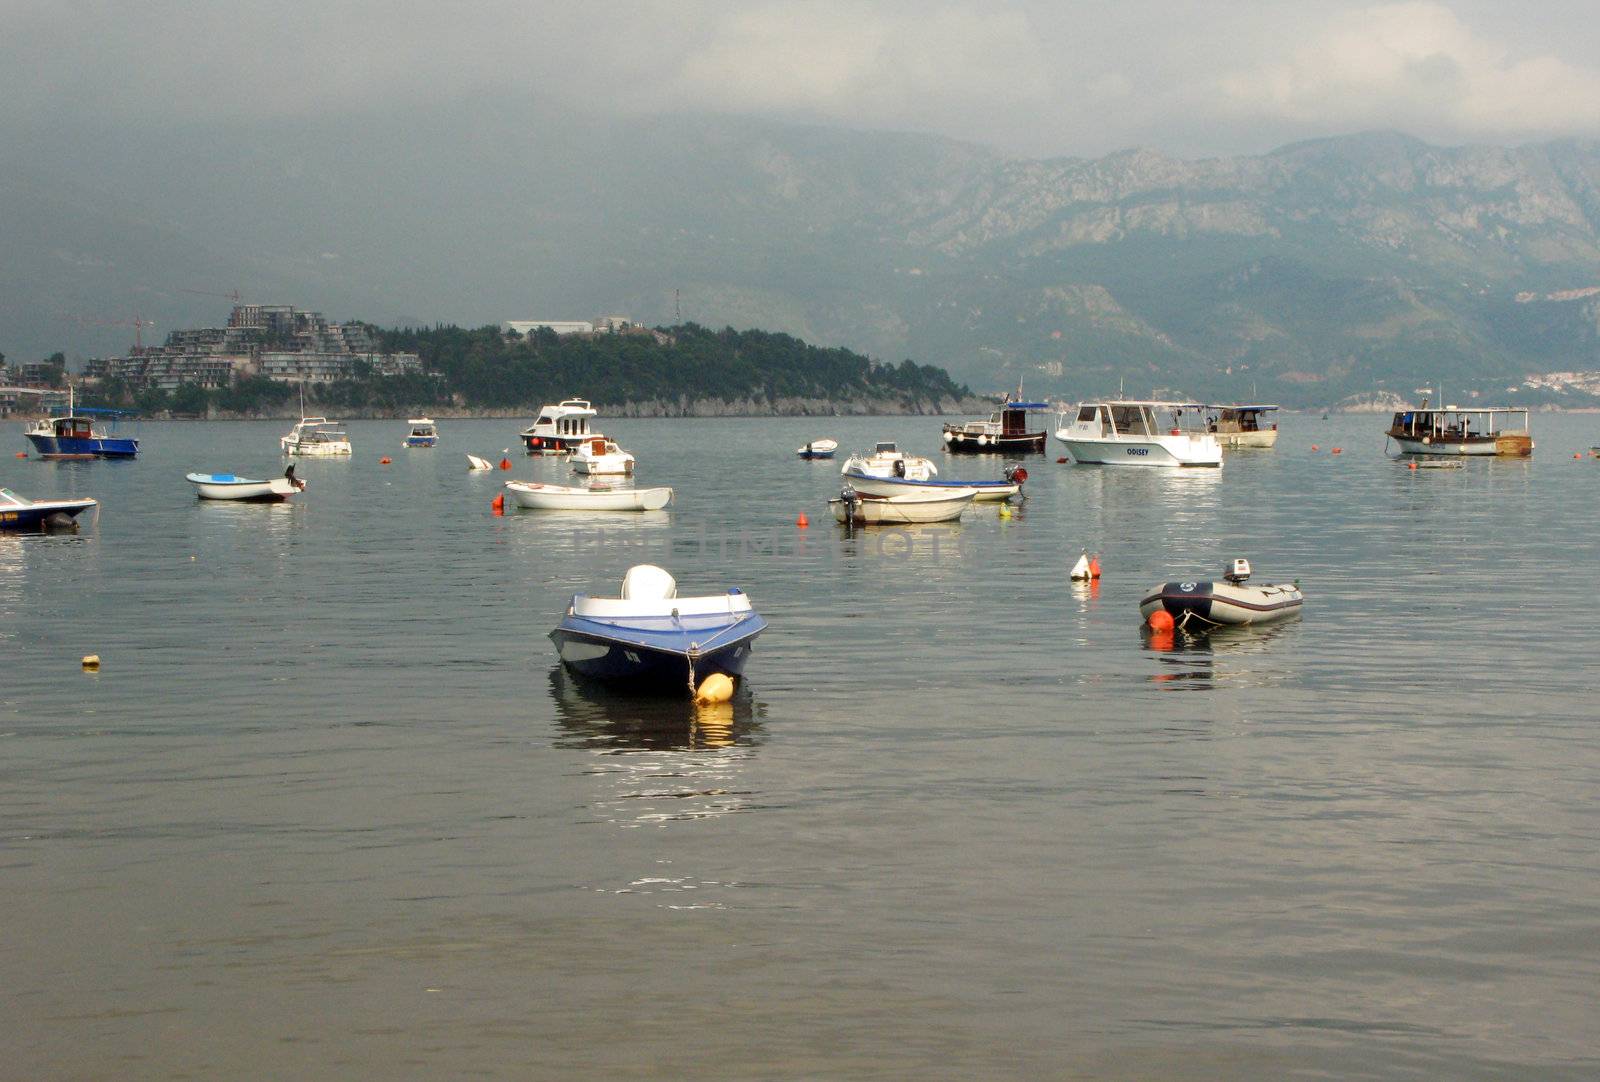 Many boats for tourists in Budva, Montenegro